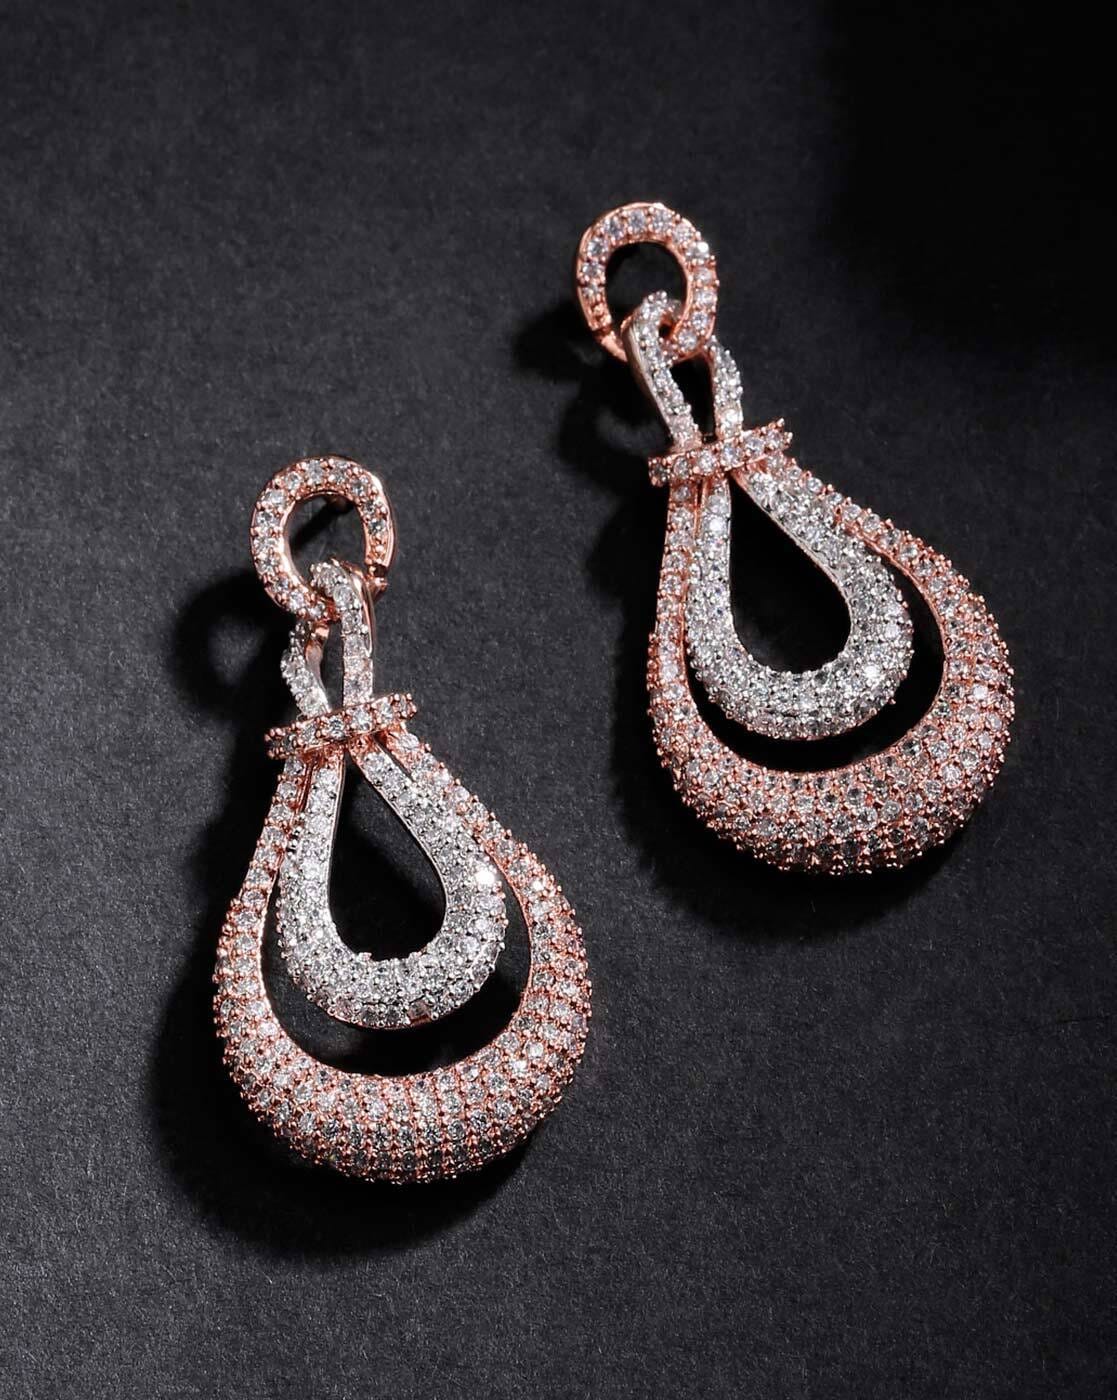 Buy Rose Gold, Dusty Rose, Pink, Crystal Drop Earrings, Crystal Cluster  Earrings, Rose Gold Wedding, Bridesmaid Gift, Pierced Online in India - Etsy